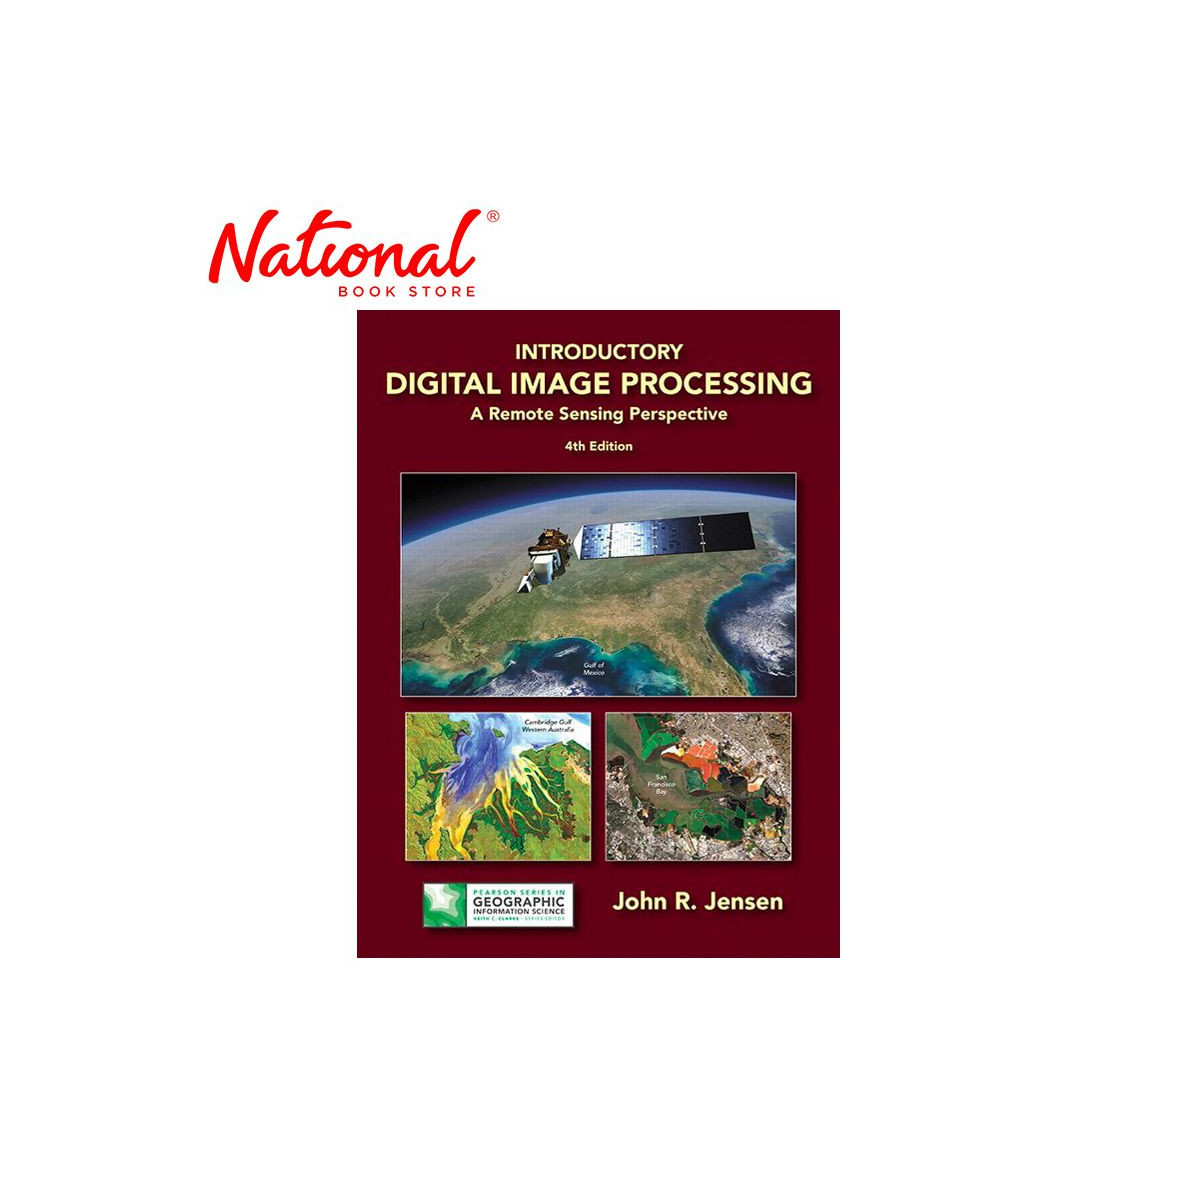 Introductory Digital Image Processing: A Remote Sensing Perspective Fourth Edition by John R. Jensen